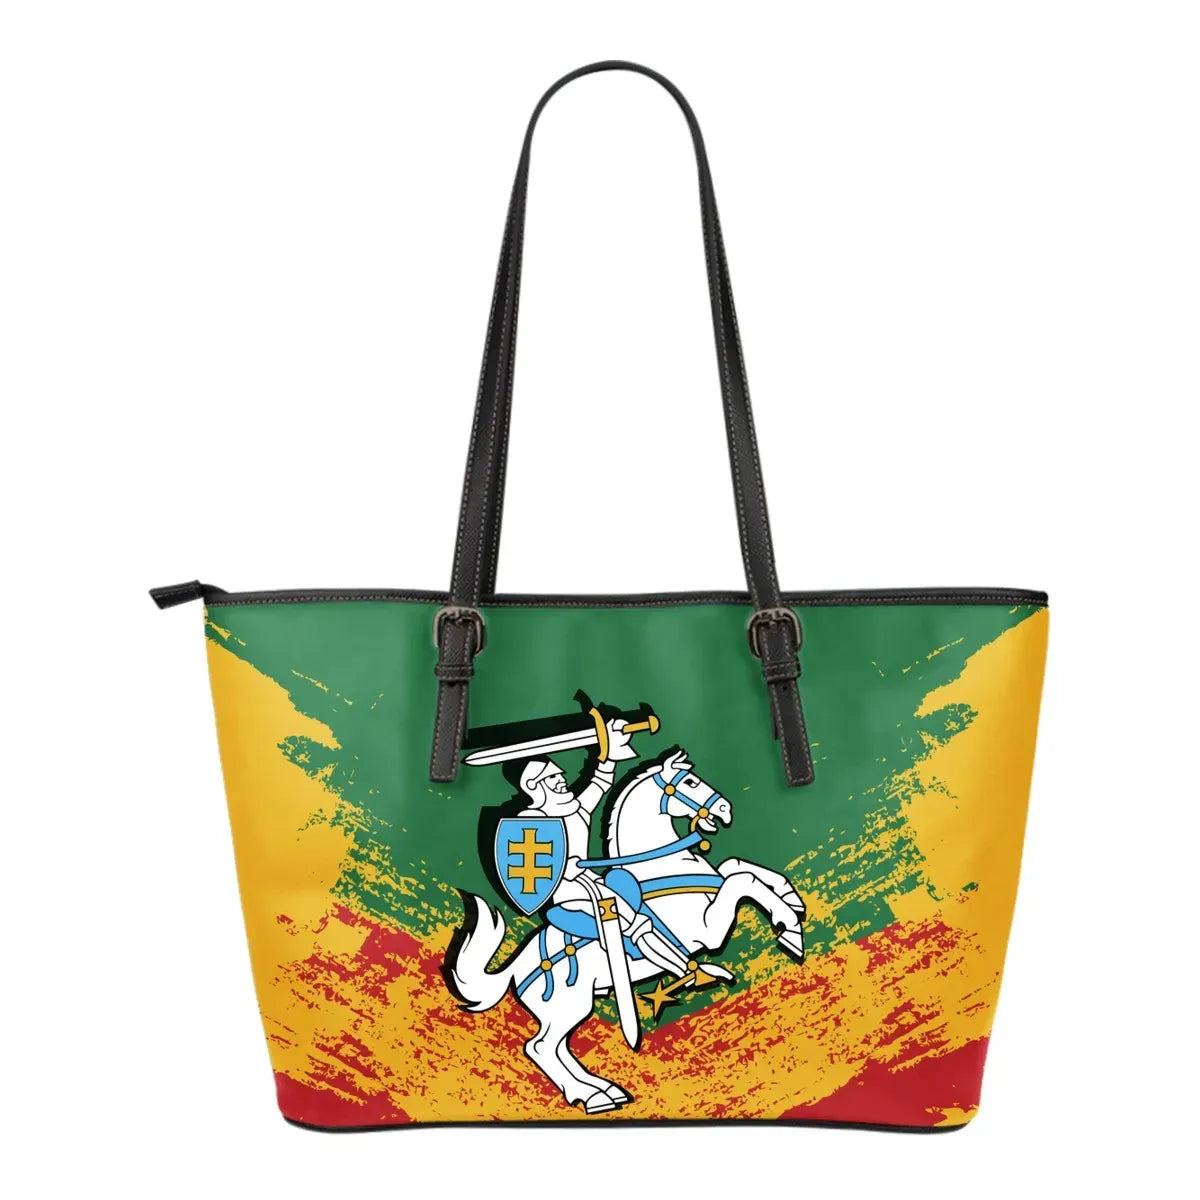 lietuva-lithuania-special-leather-tote